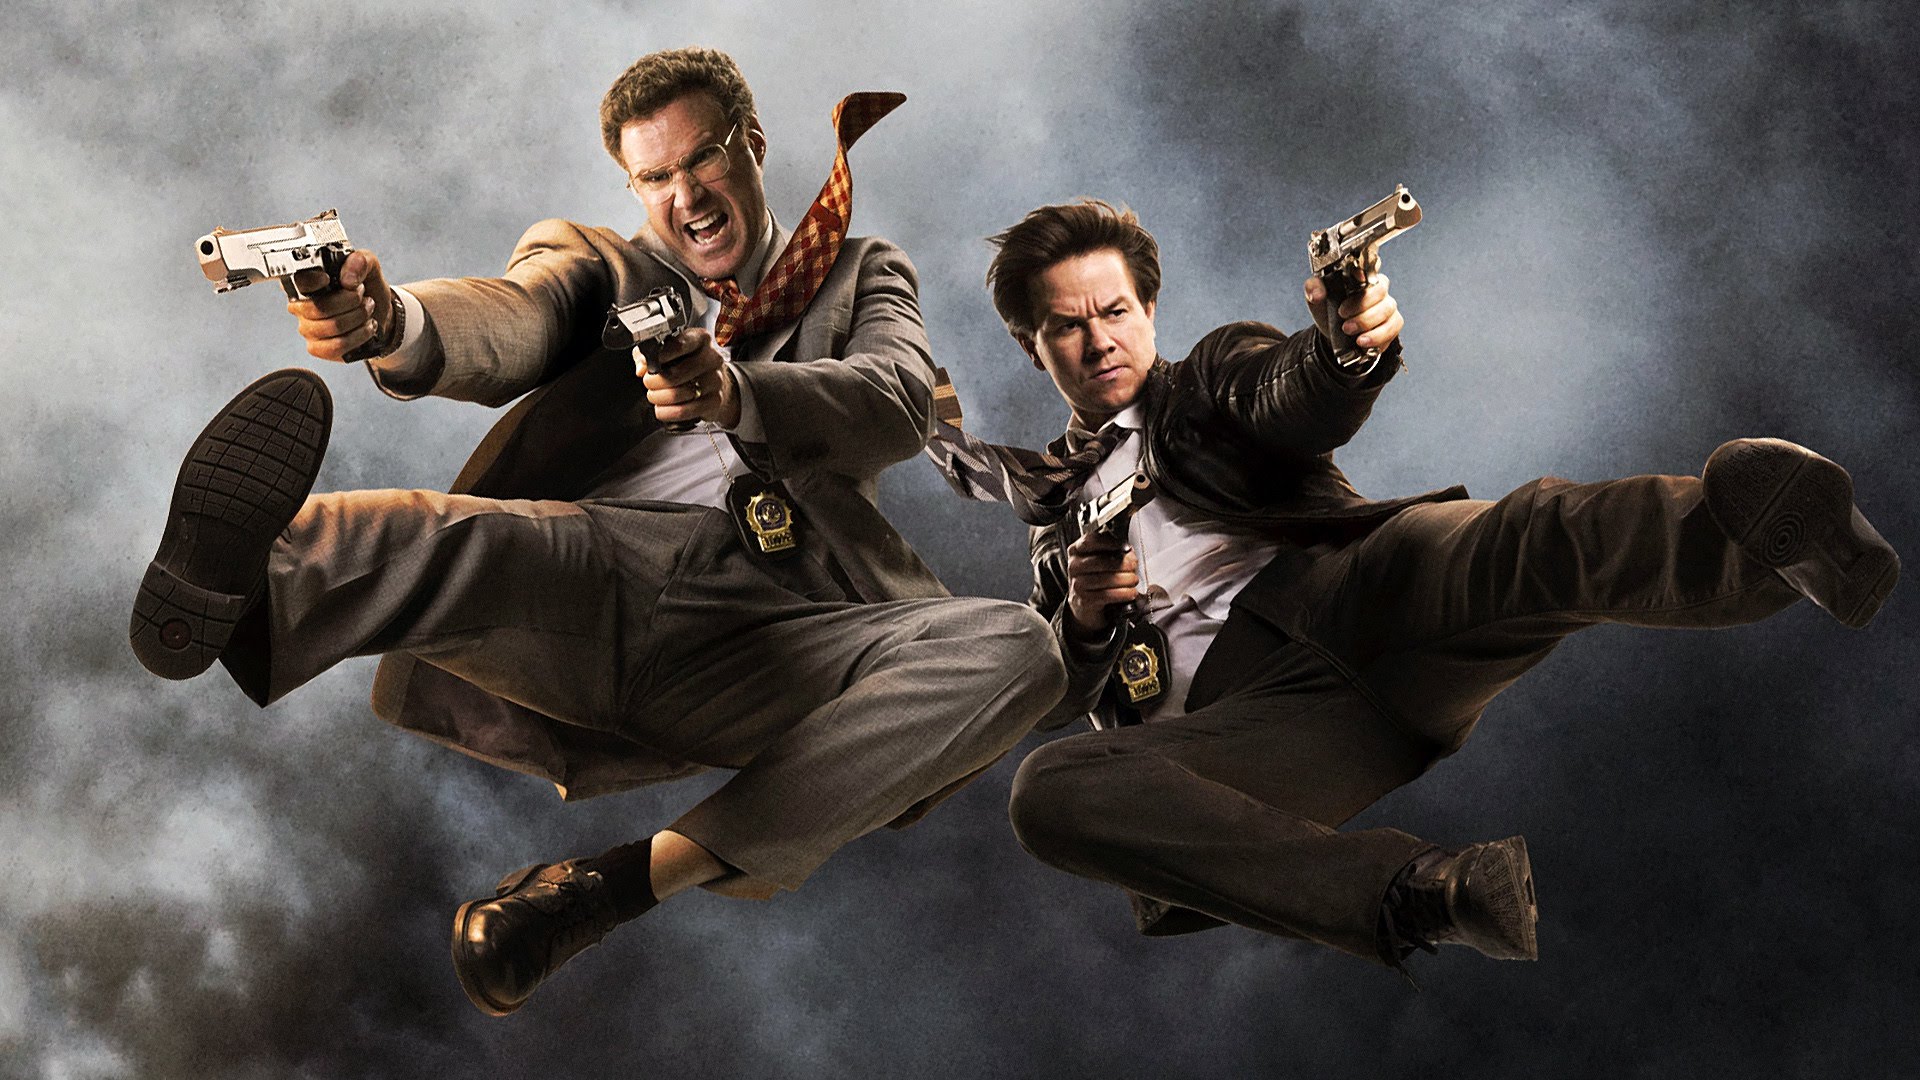 MOVIE REVIEW: The Other Guys (2010)